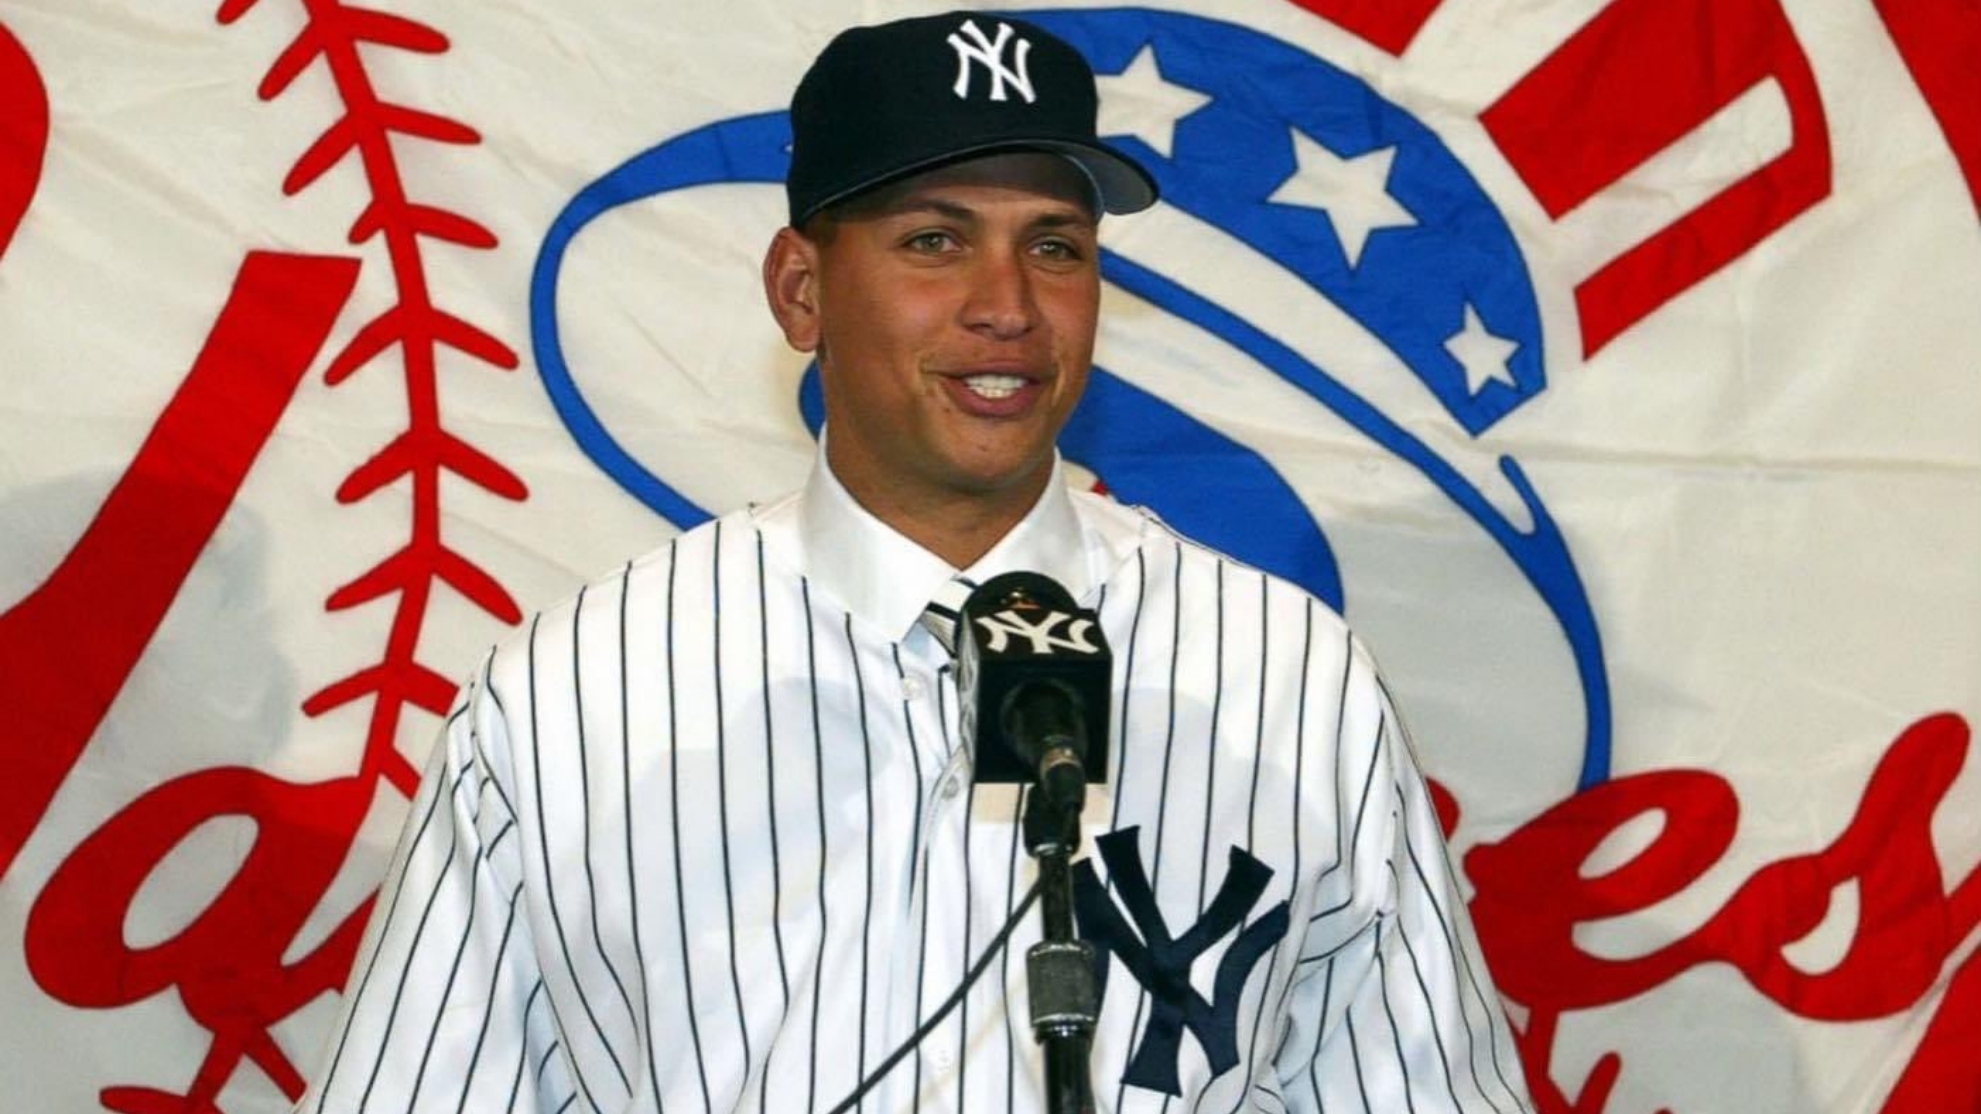 Cal Ripken Jr. opens up on A-Rod All-Star moment that p*ssed him off